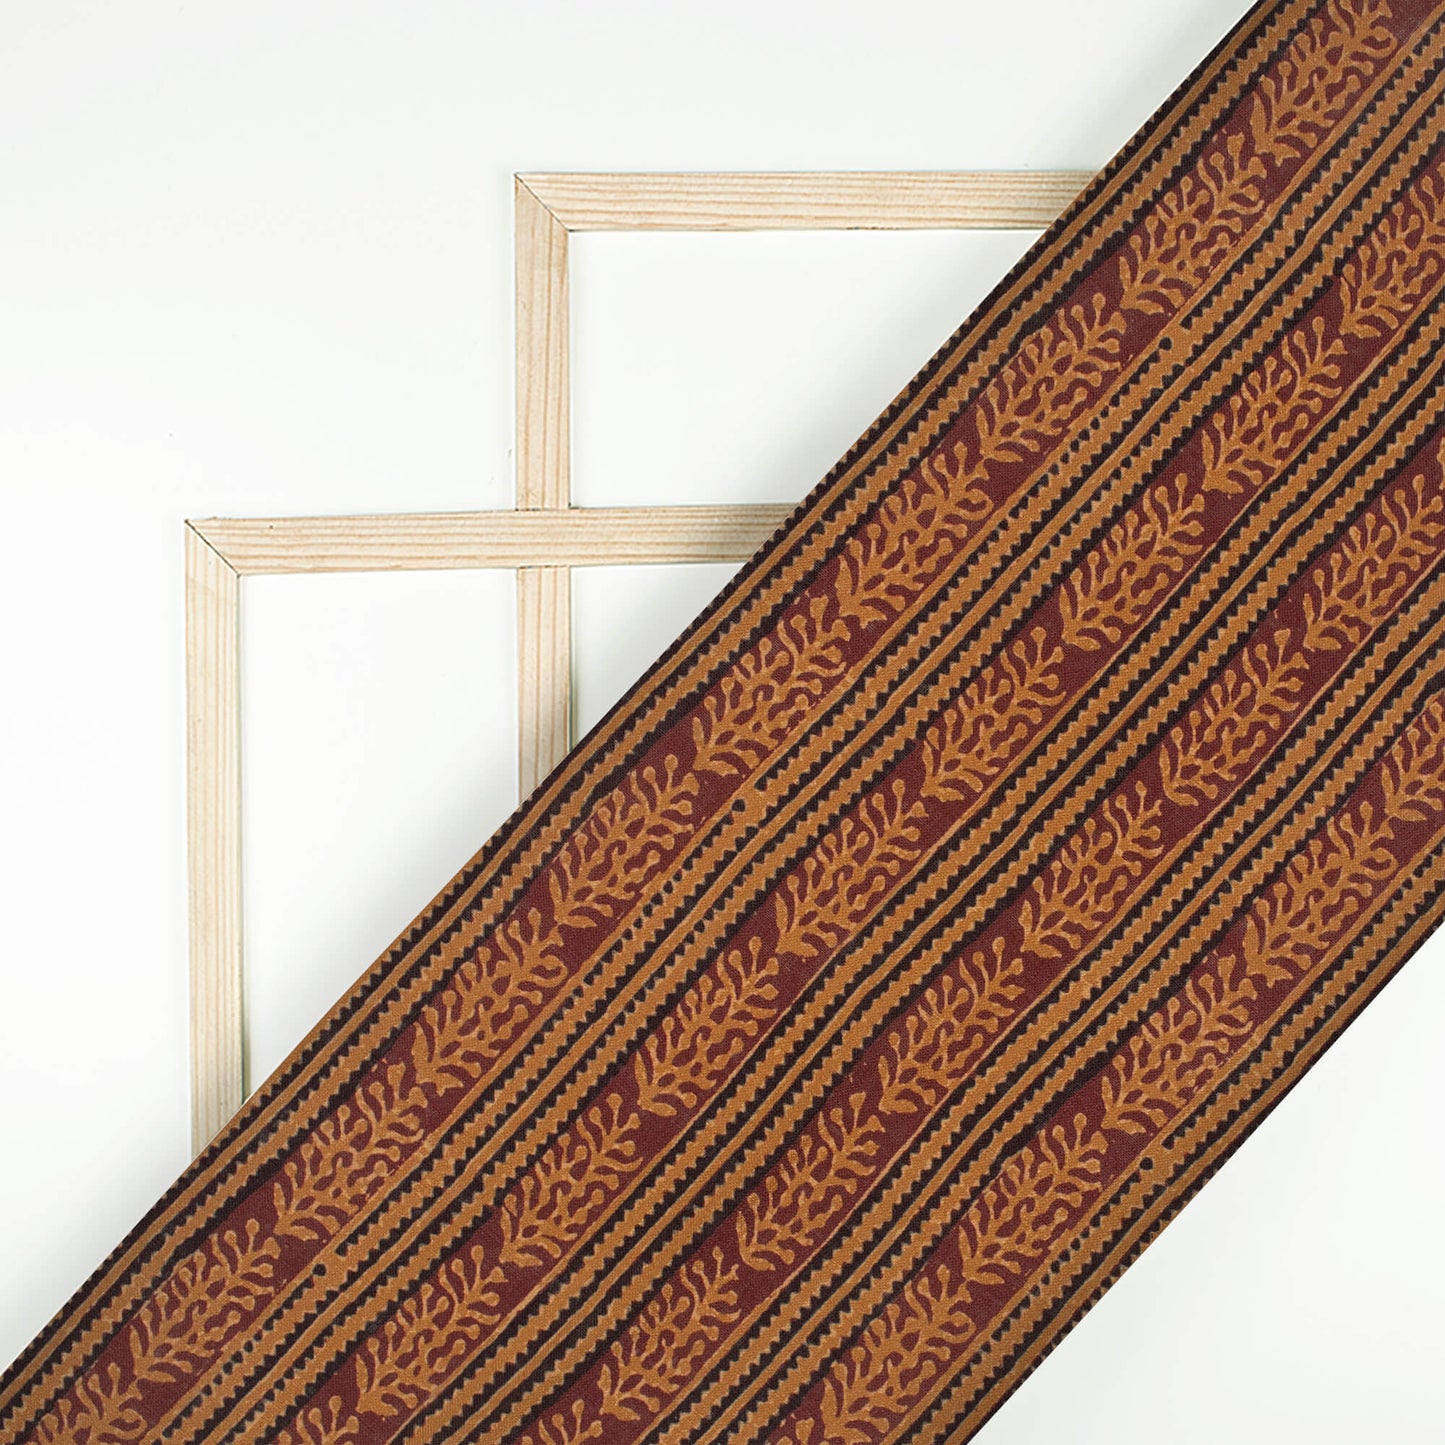 Ochre Yellow And Pecan Brown Stripes Pattern Digital Print Linen Textured Fabric (Width 56 Inches)